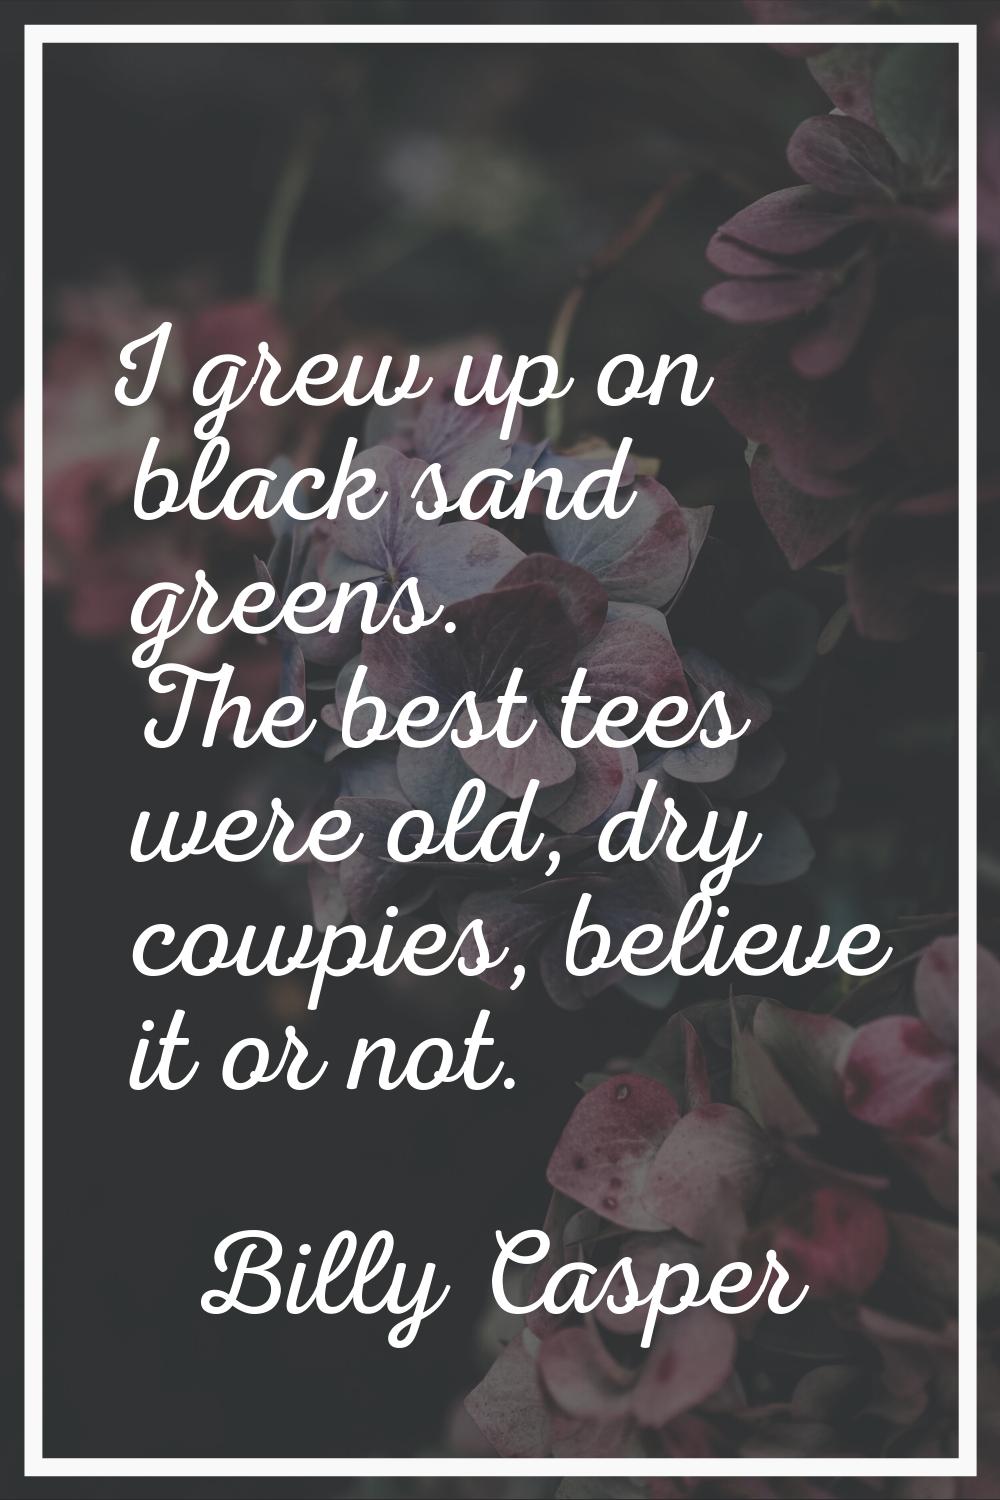 I grew up on black sand greens. The best tees were old, dry cowpies, believe it or not.